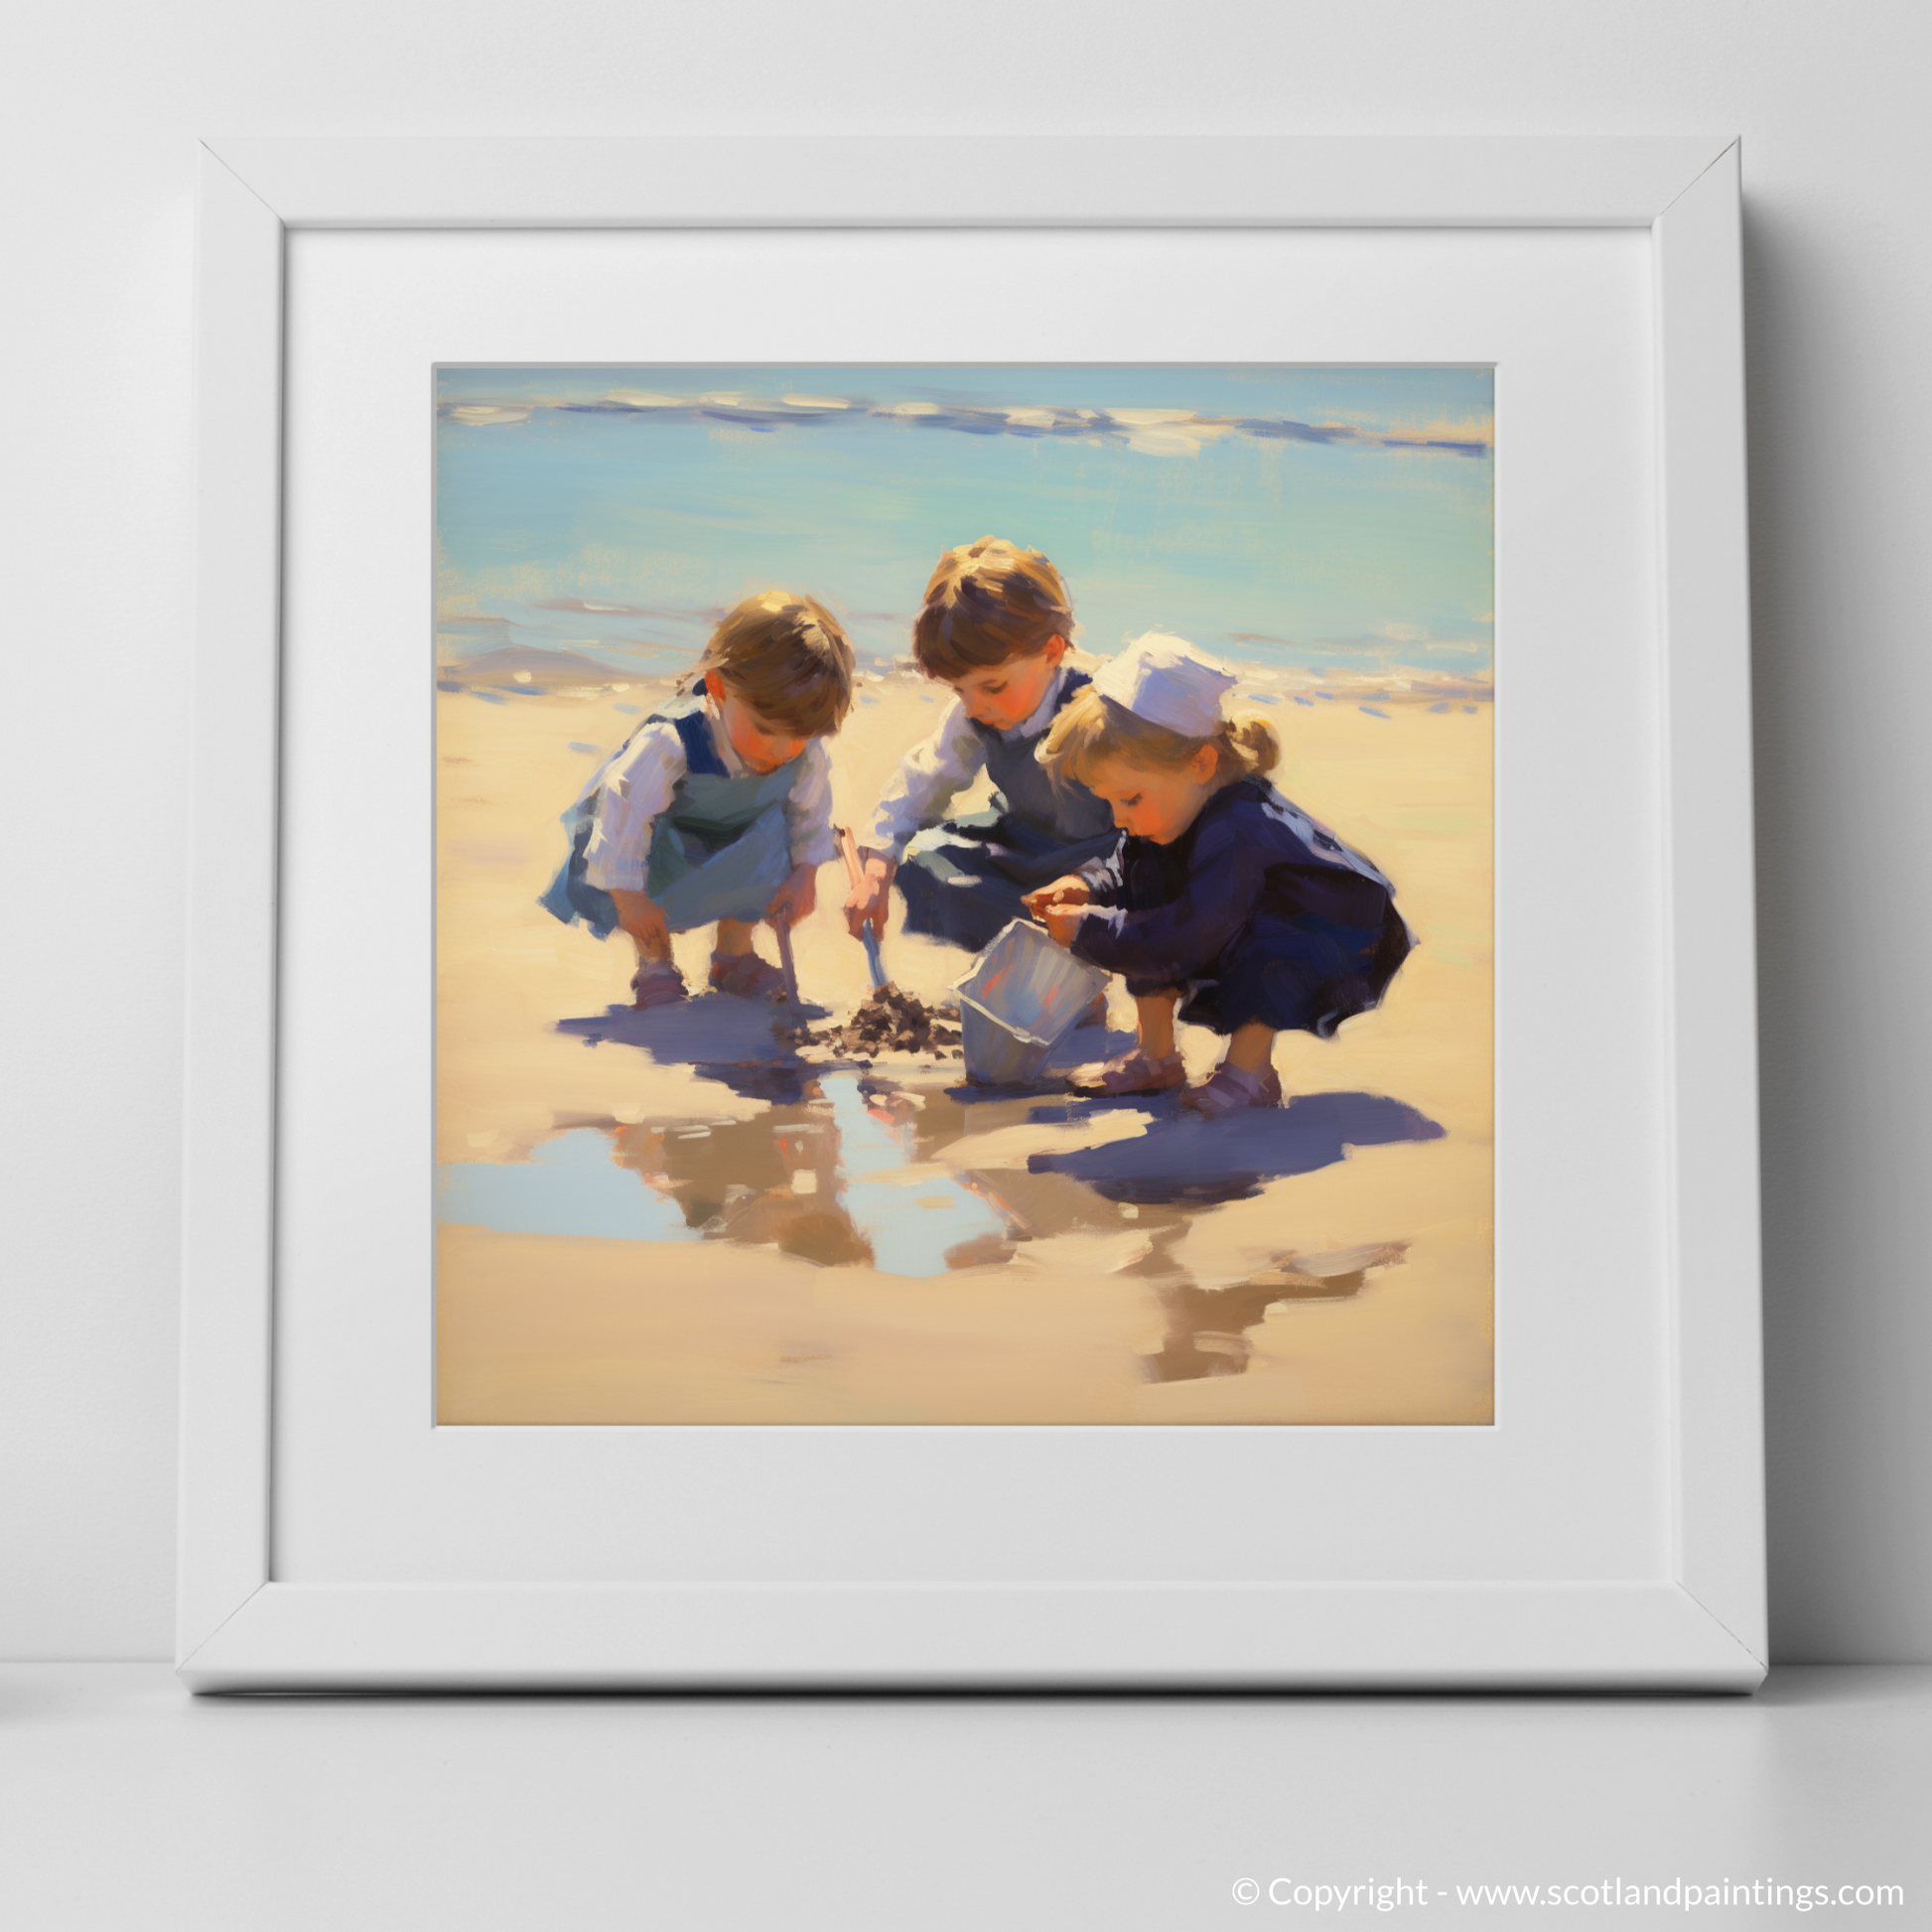 Art Print of Three children digging in the sand at St. Andrews Beach with a white frame